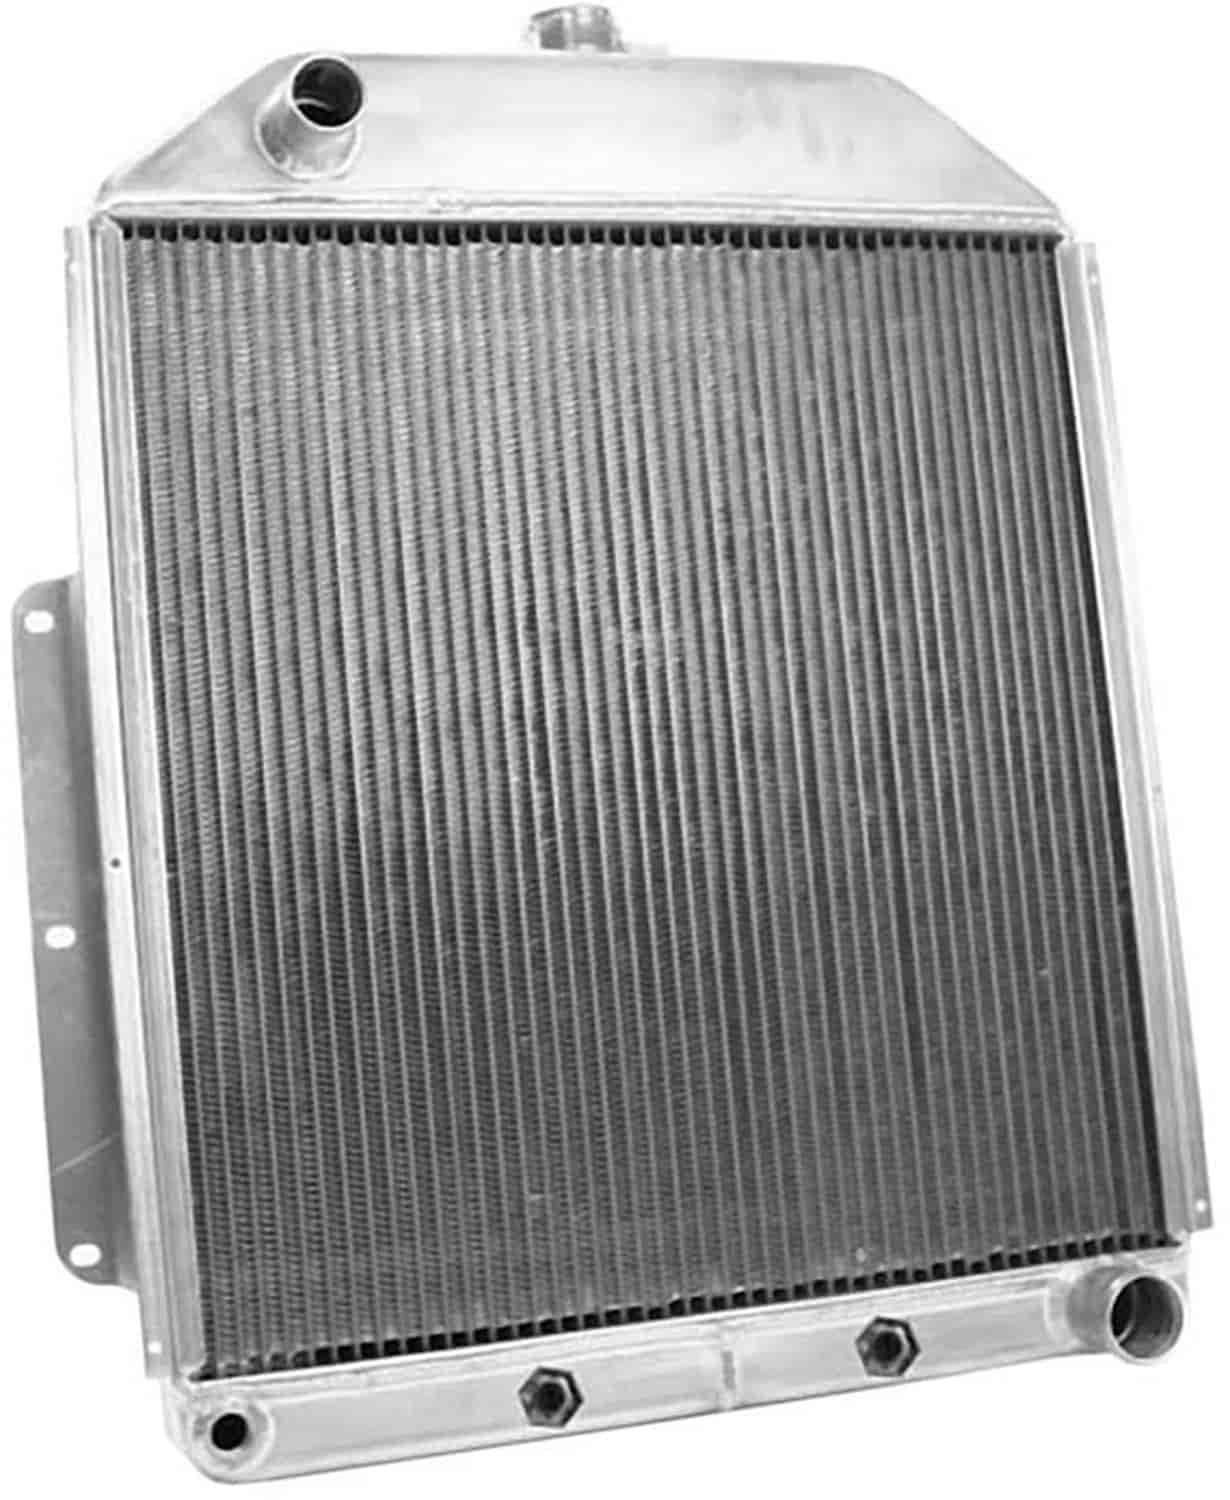 ExactFit Radiator for 1942-1952 Ford Truck with Chevy V8